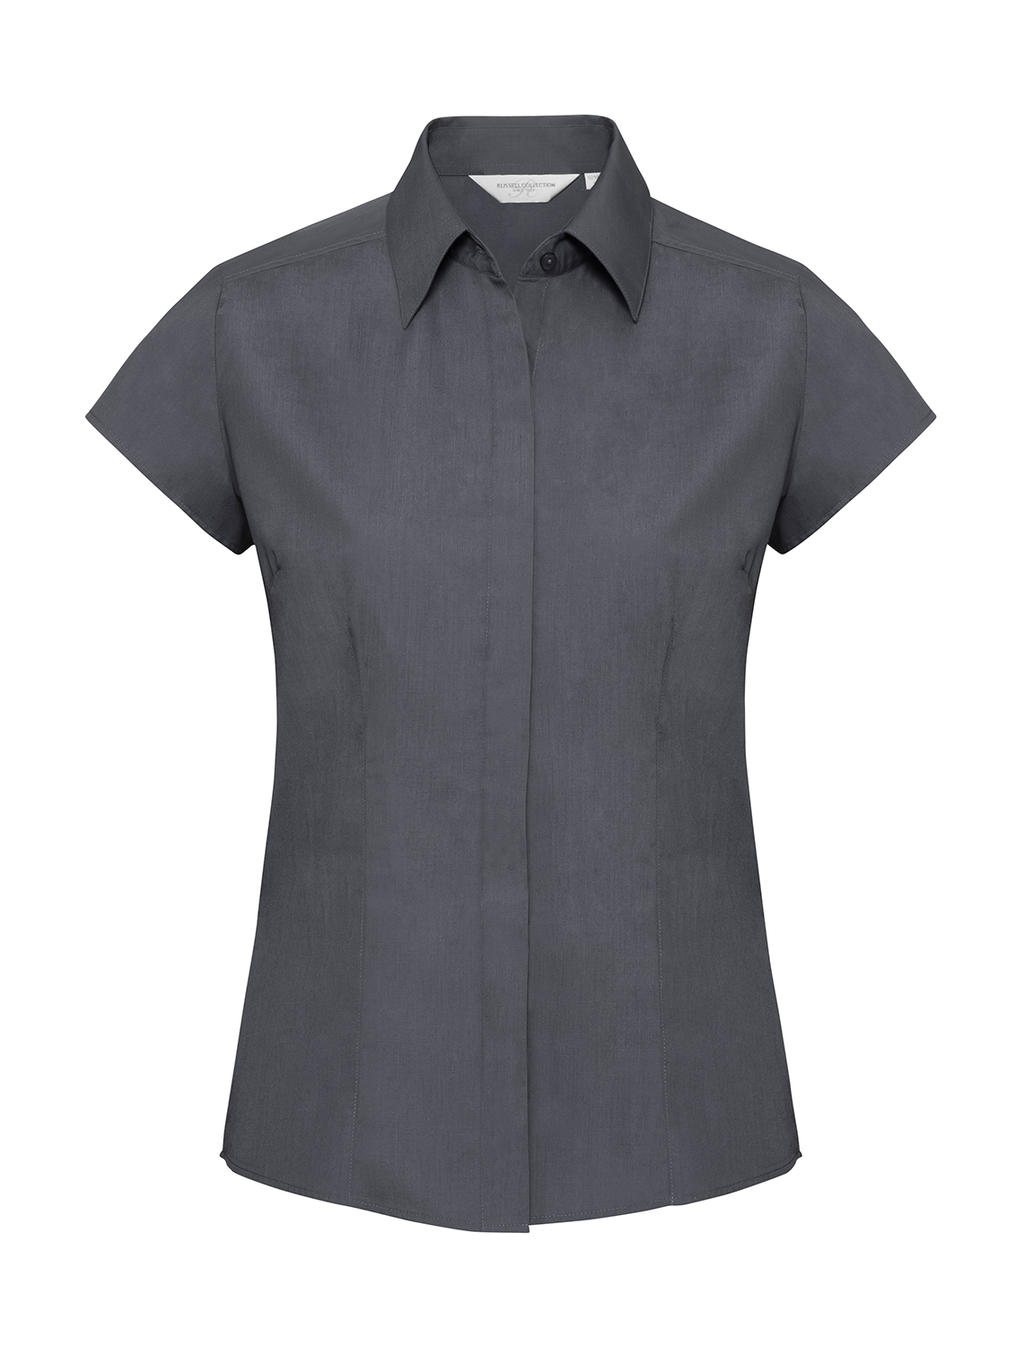  Ladies Fitted Poplin Shirt in Farbe Convoy Grey